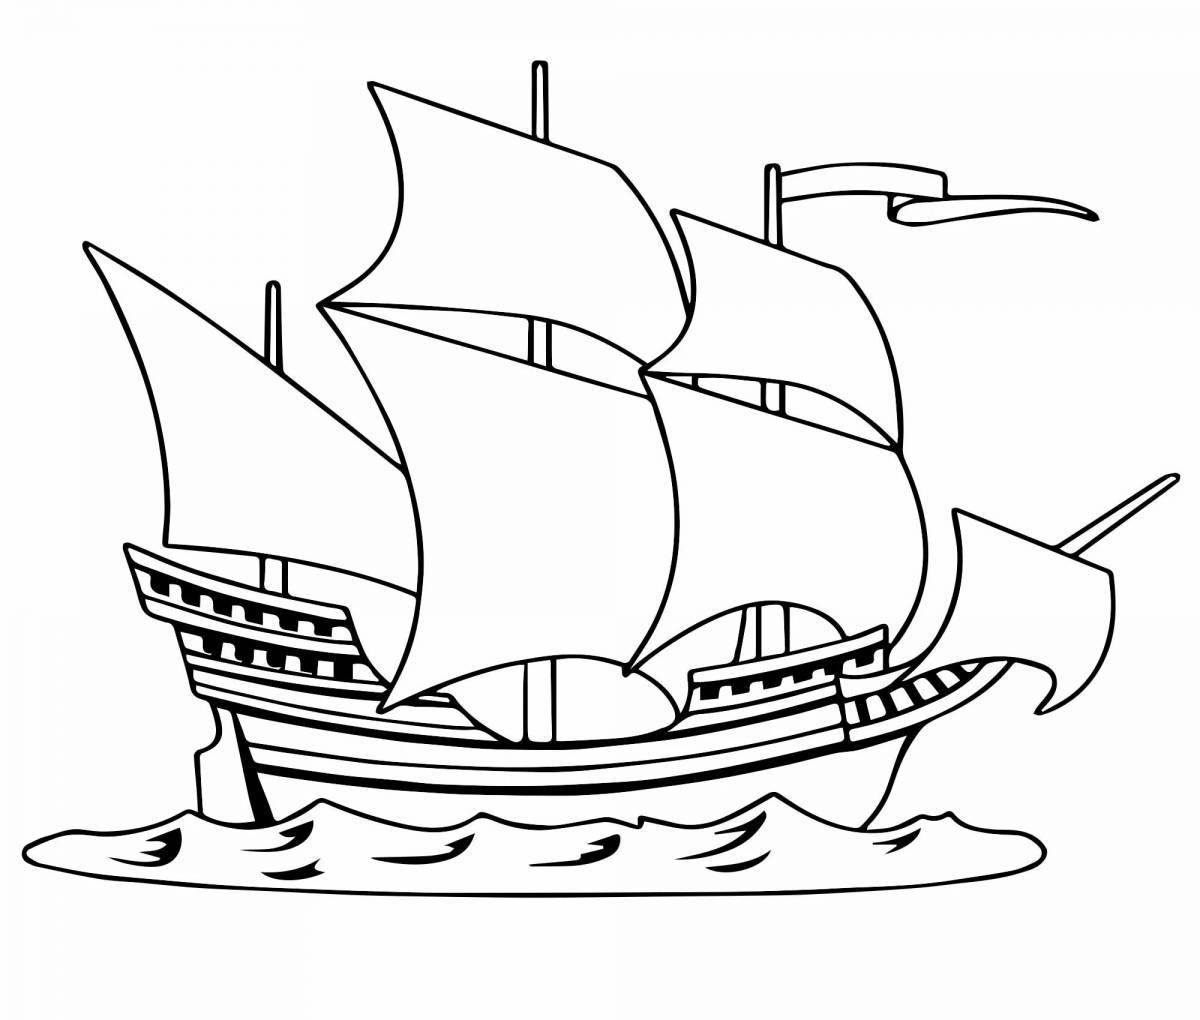 Awesome ship coloring page for kids